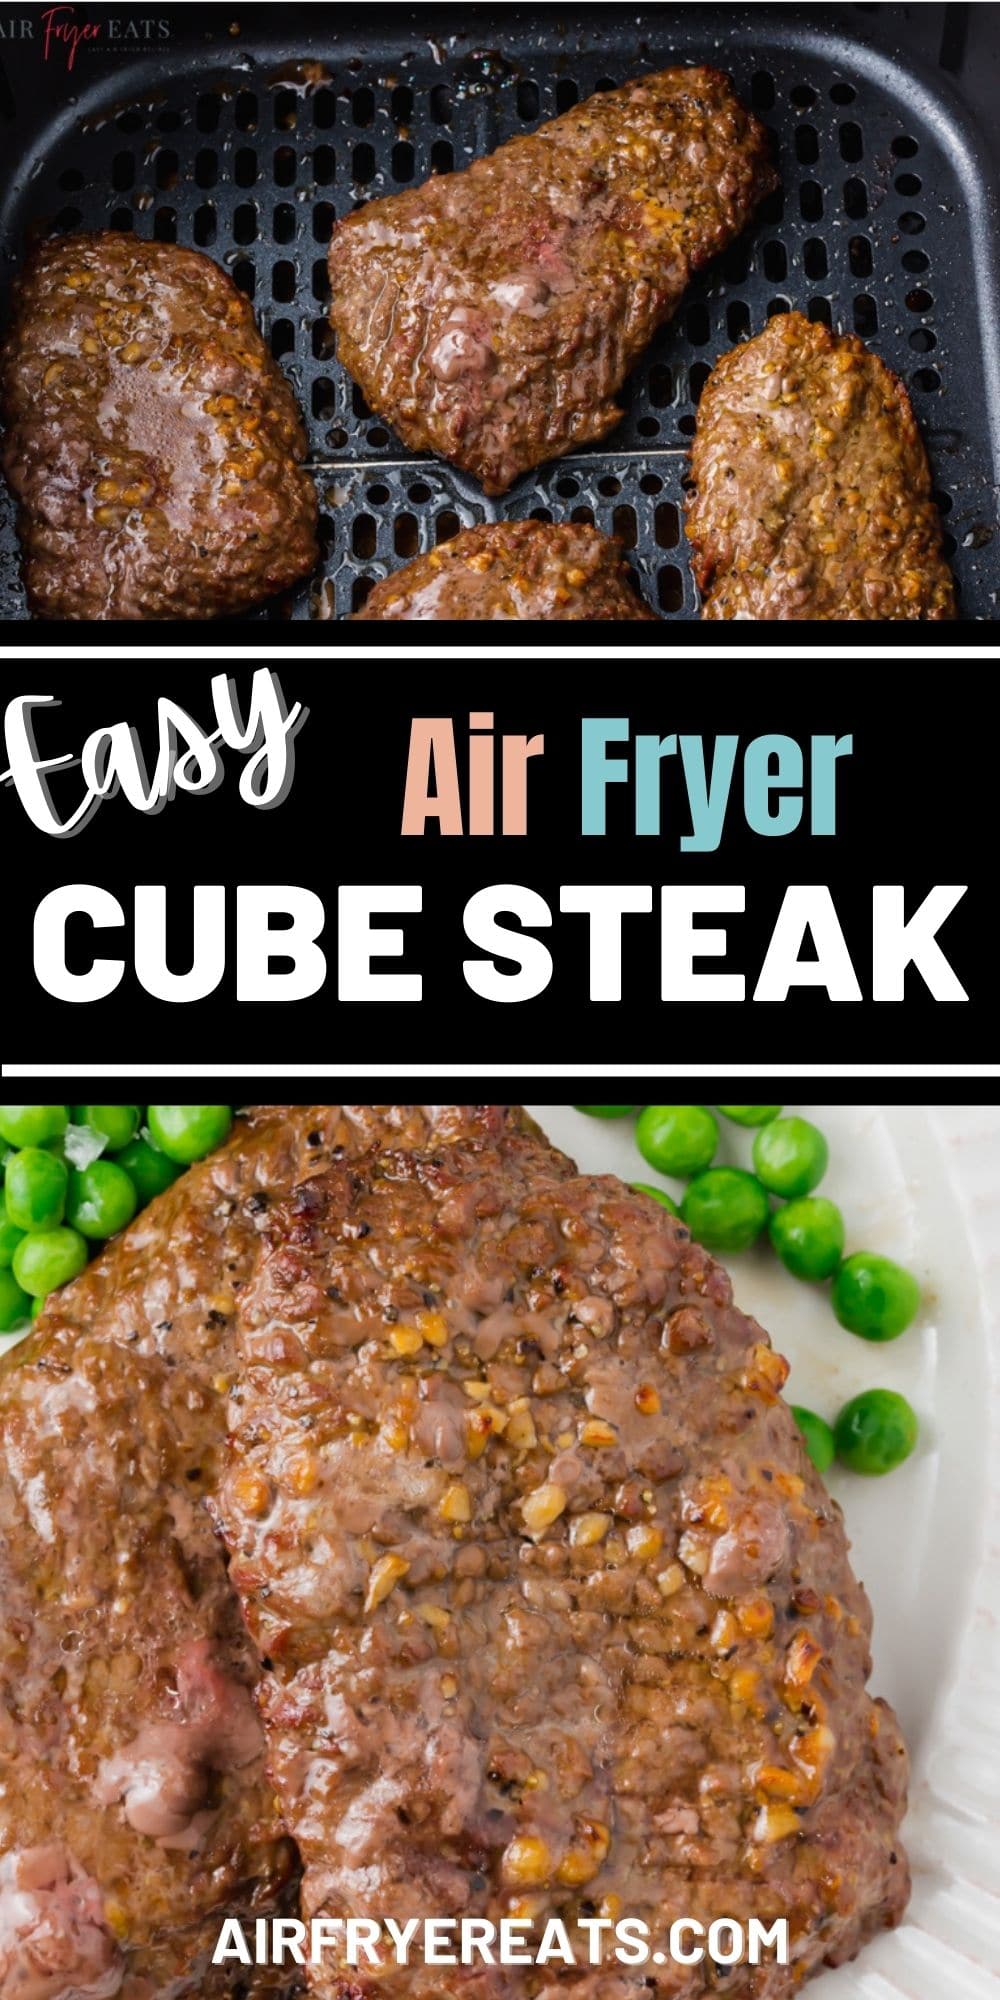 Make this savory marinated cube steak in your air fryer in a flash! We'll show you how to turn an inexpensive beef cut into a delicious dinner. via @vegetarianmamma